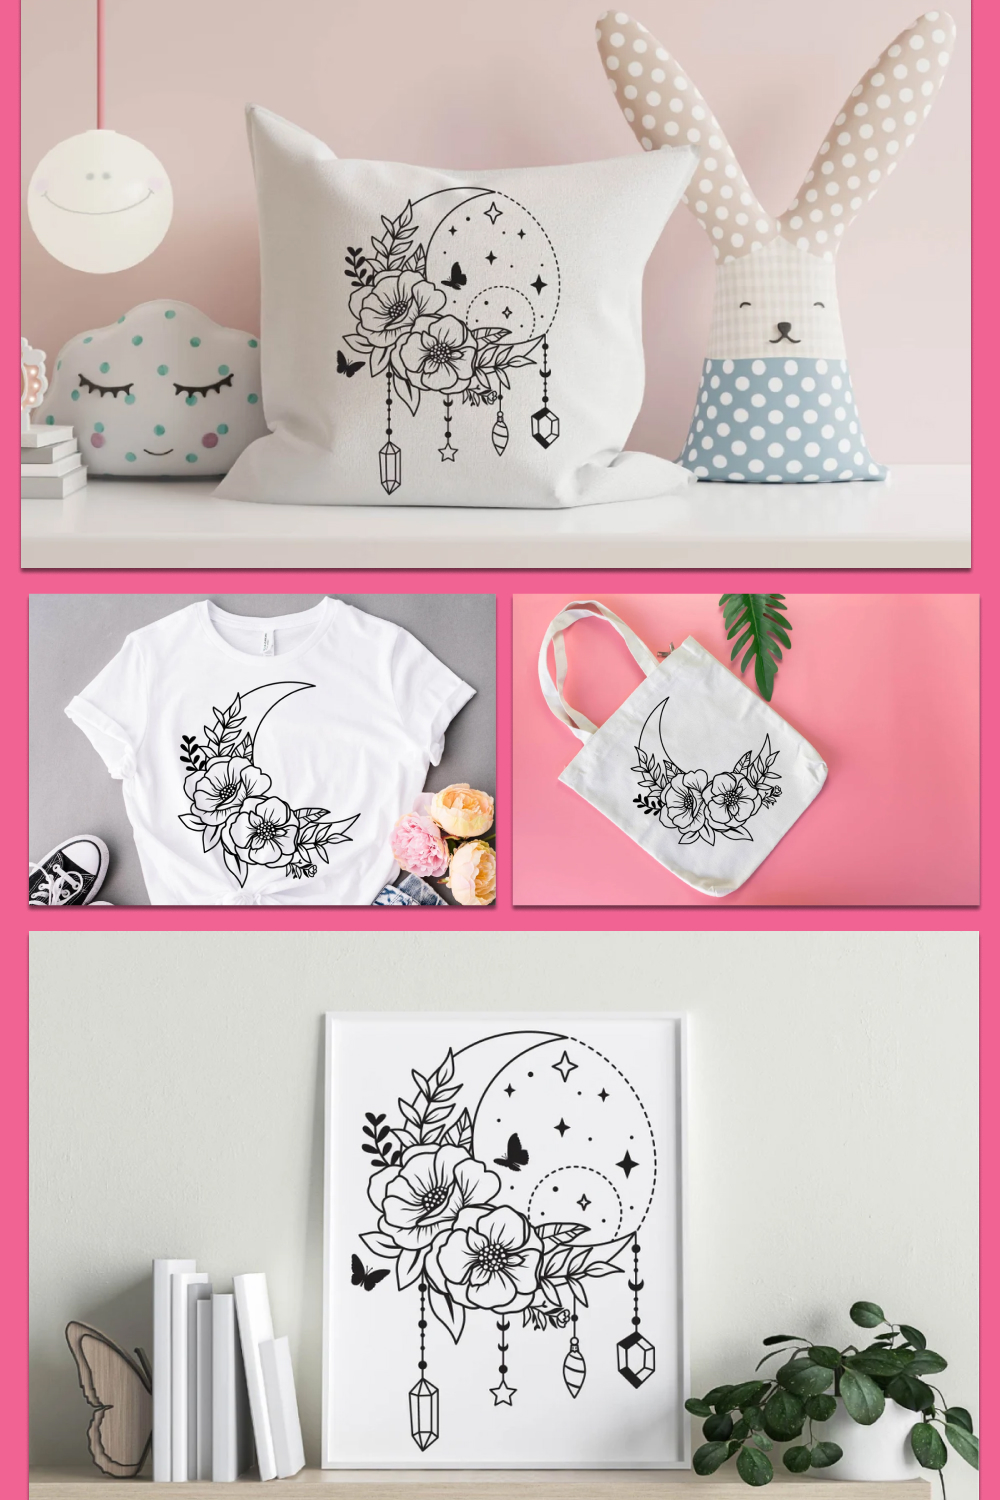 Floral print with the moon on a pillow, clothes, picture.